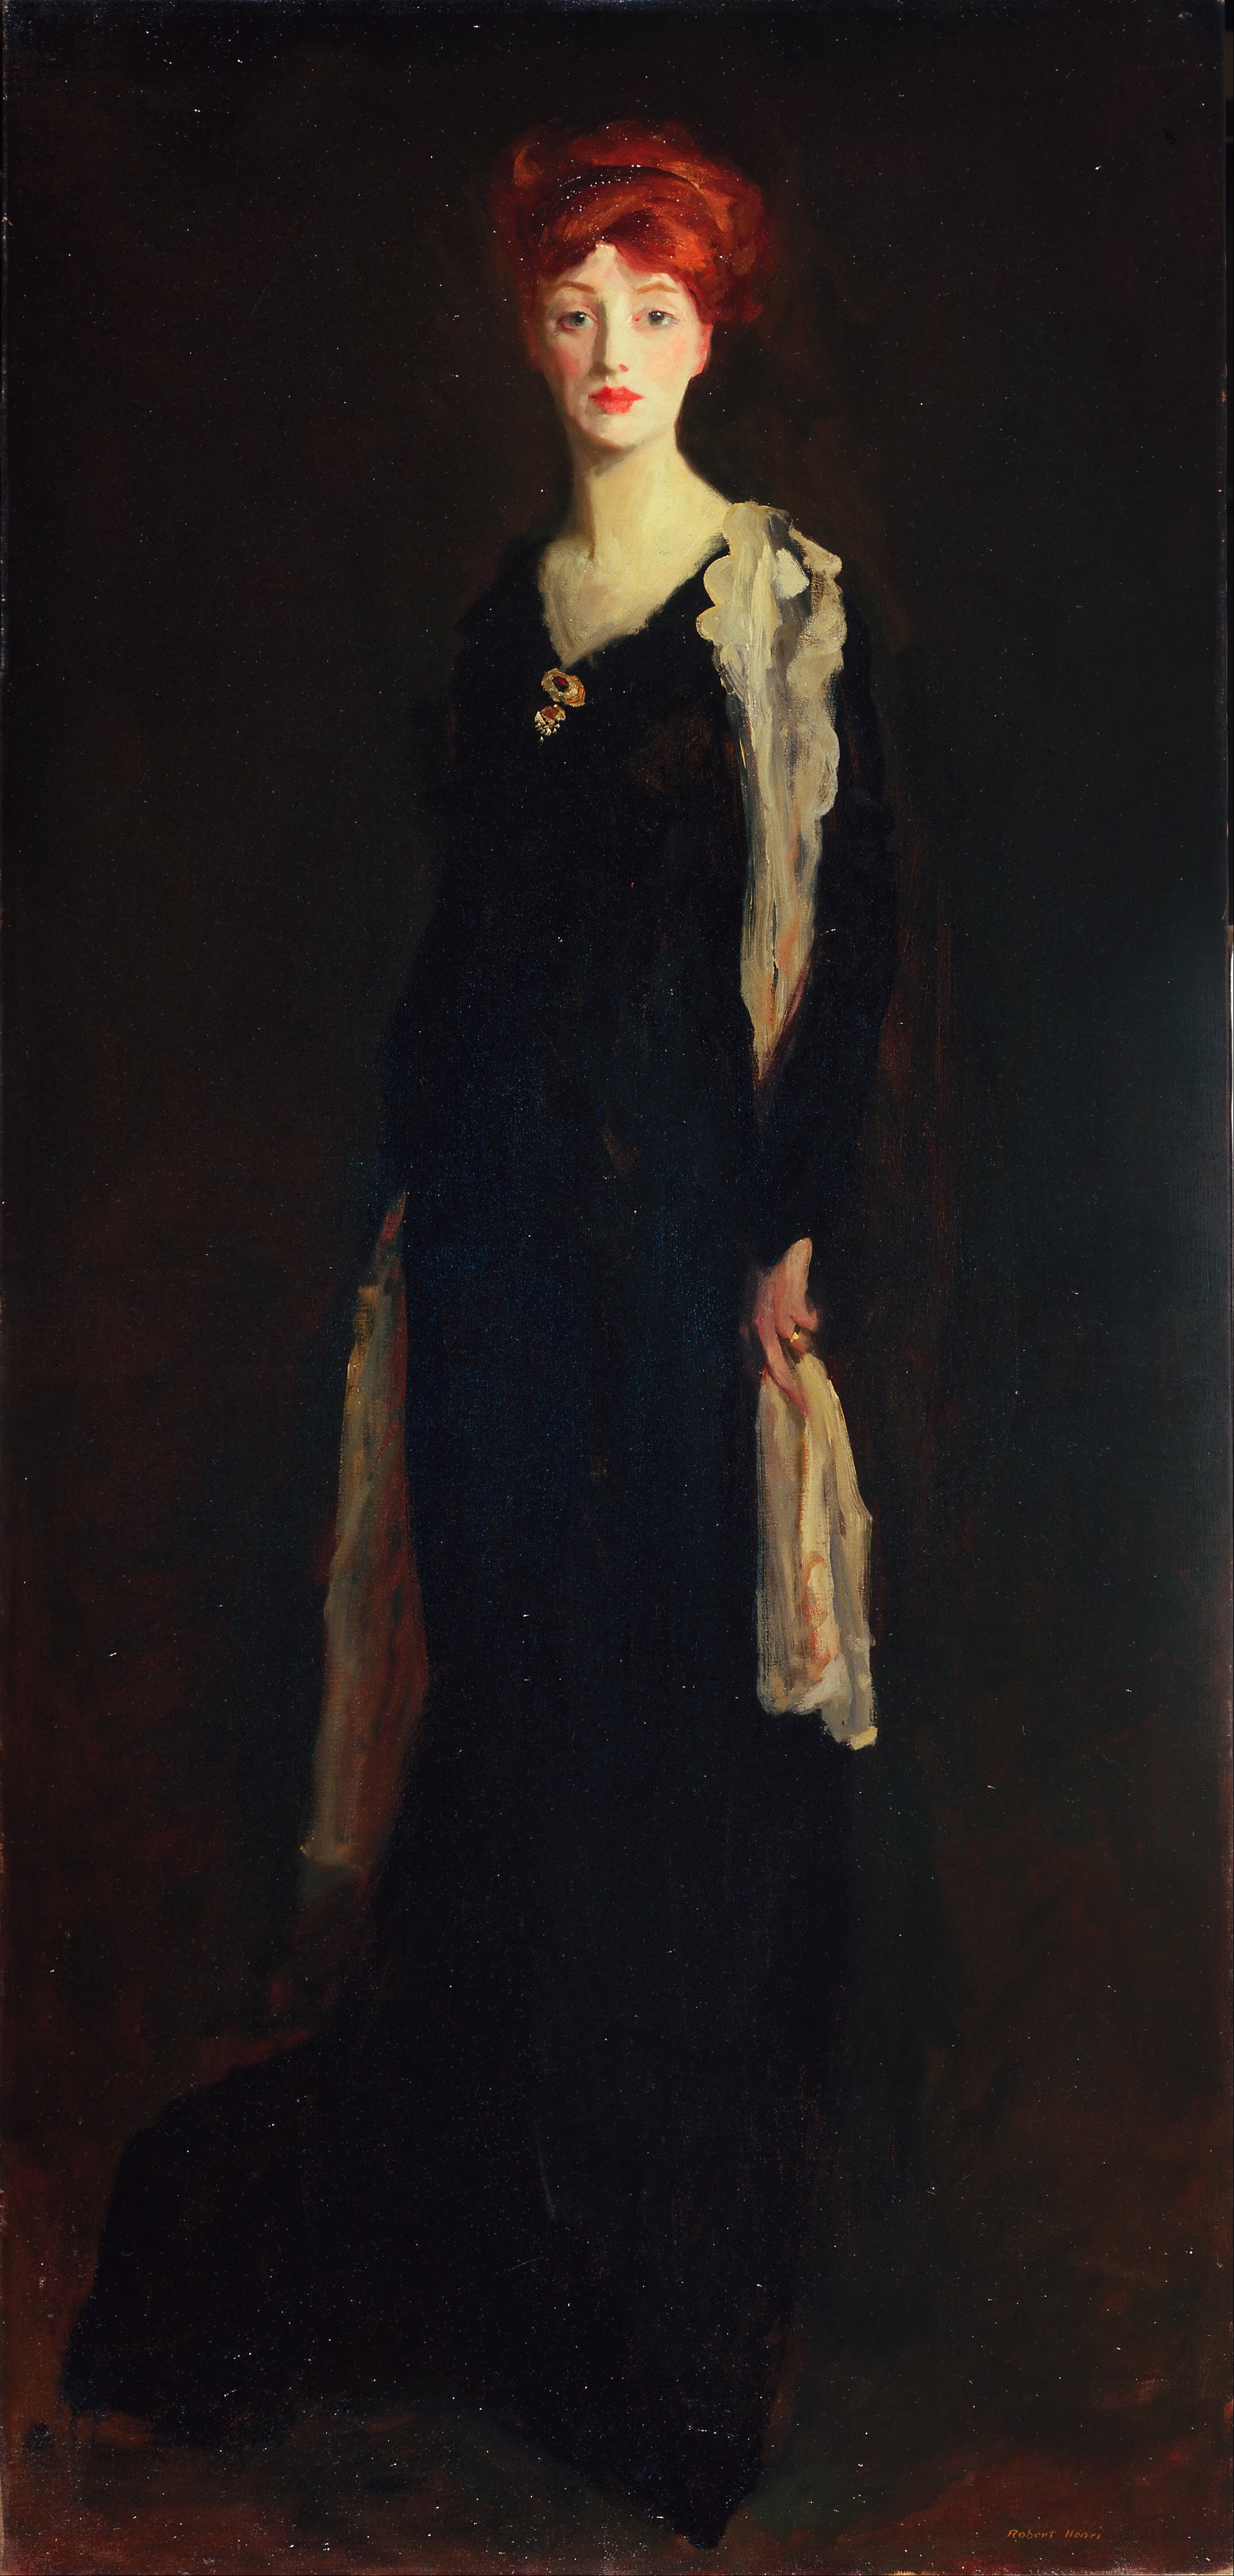 Lady in Black with Spanish Scarf (O in Black with a Scarf) by Robert Henri - 1910 - 196.2 x 94 cm de Young Museum